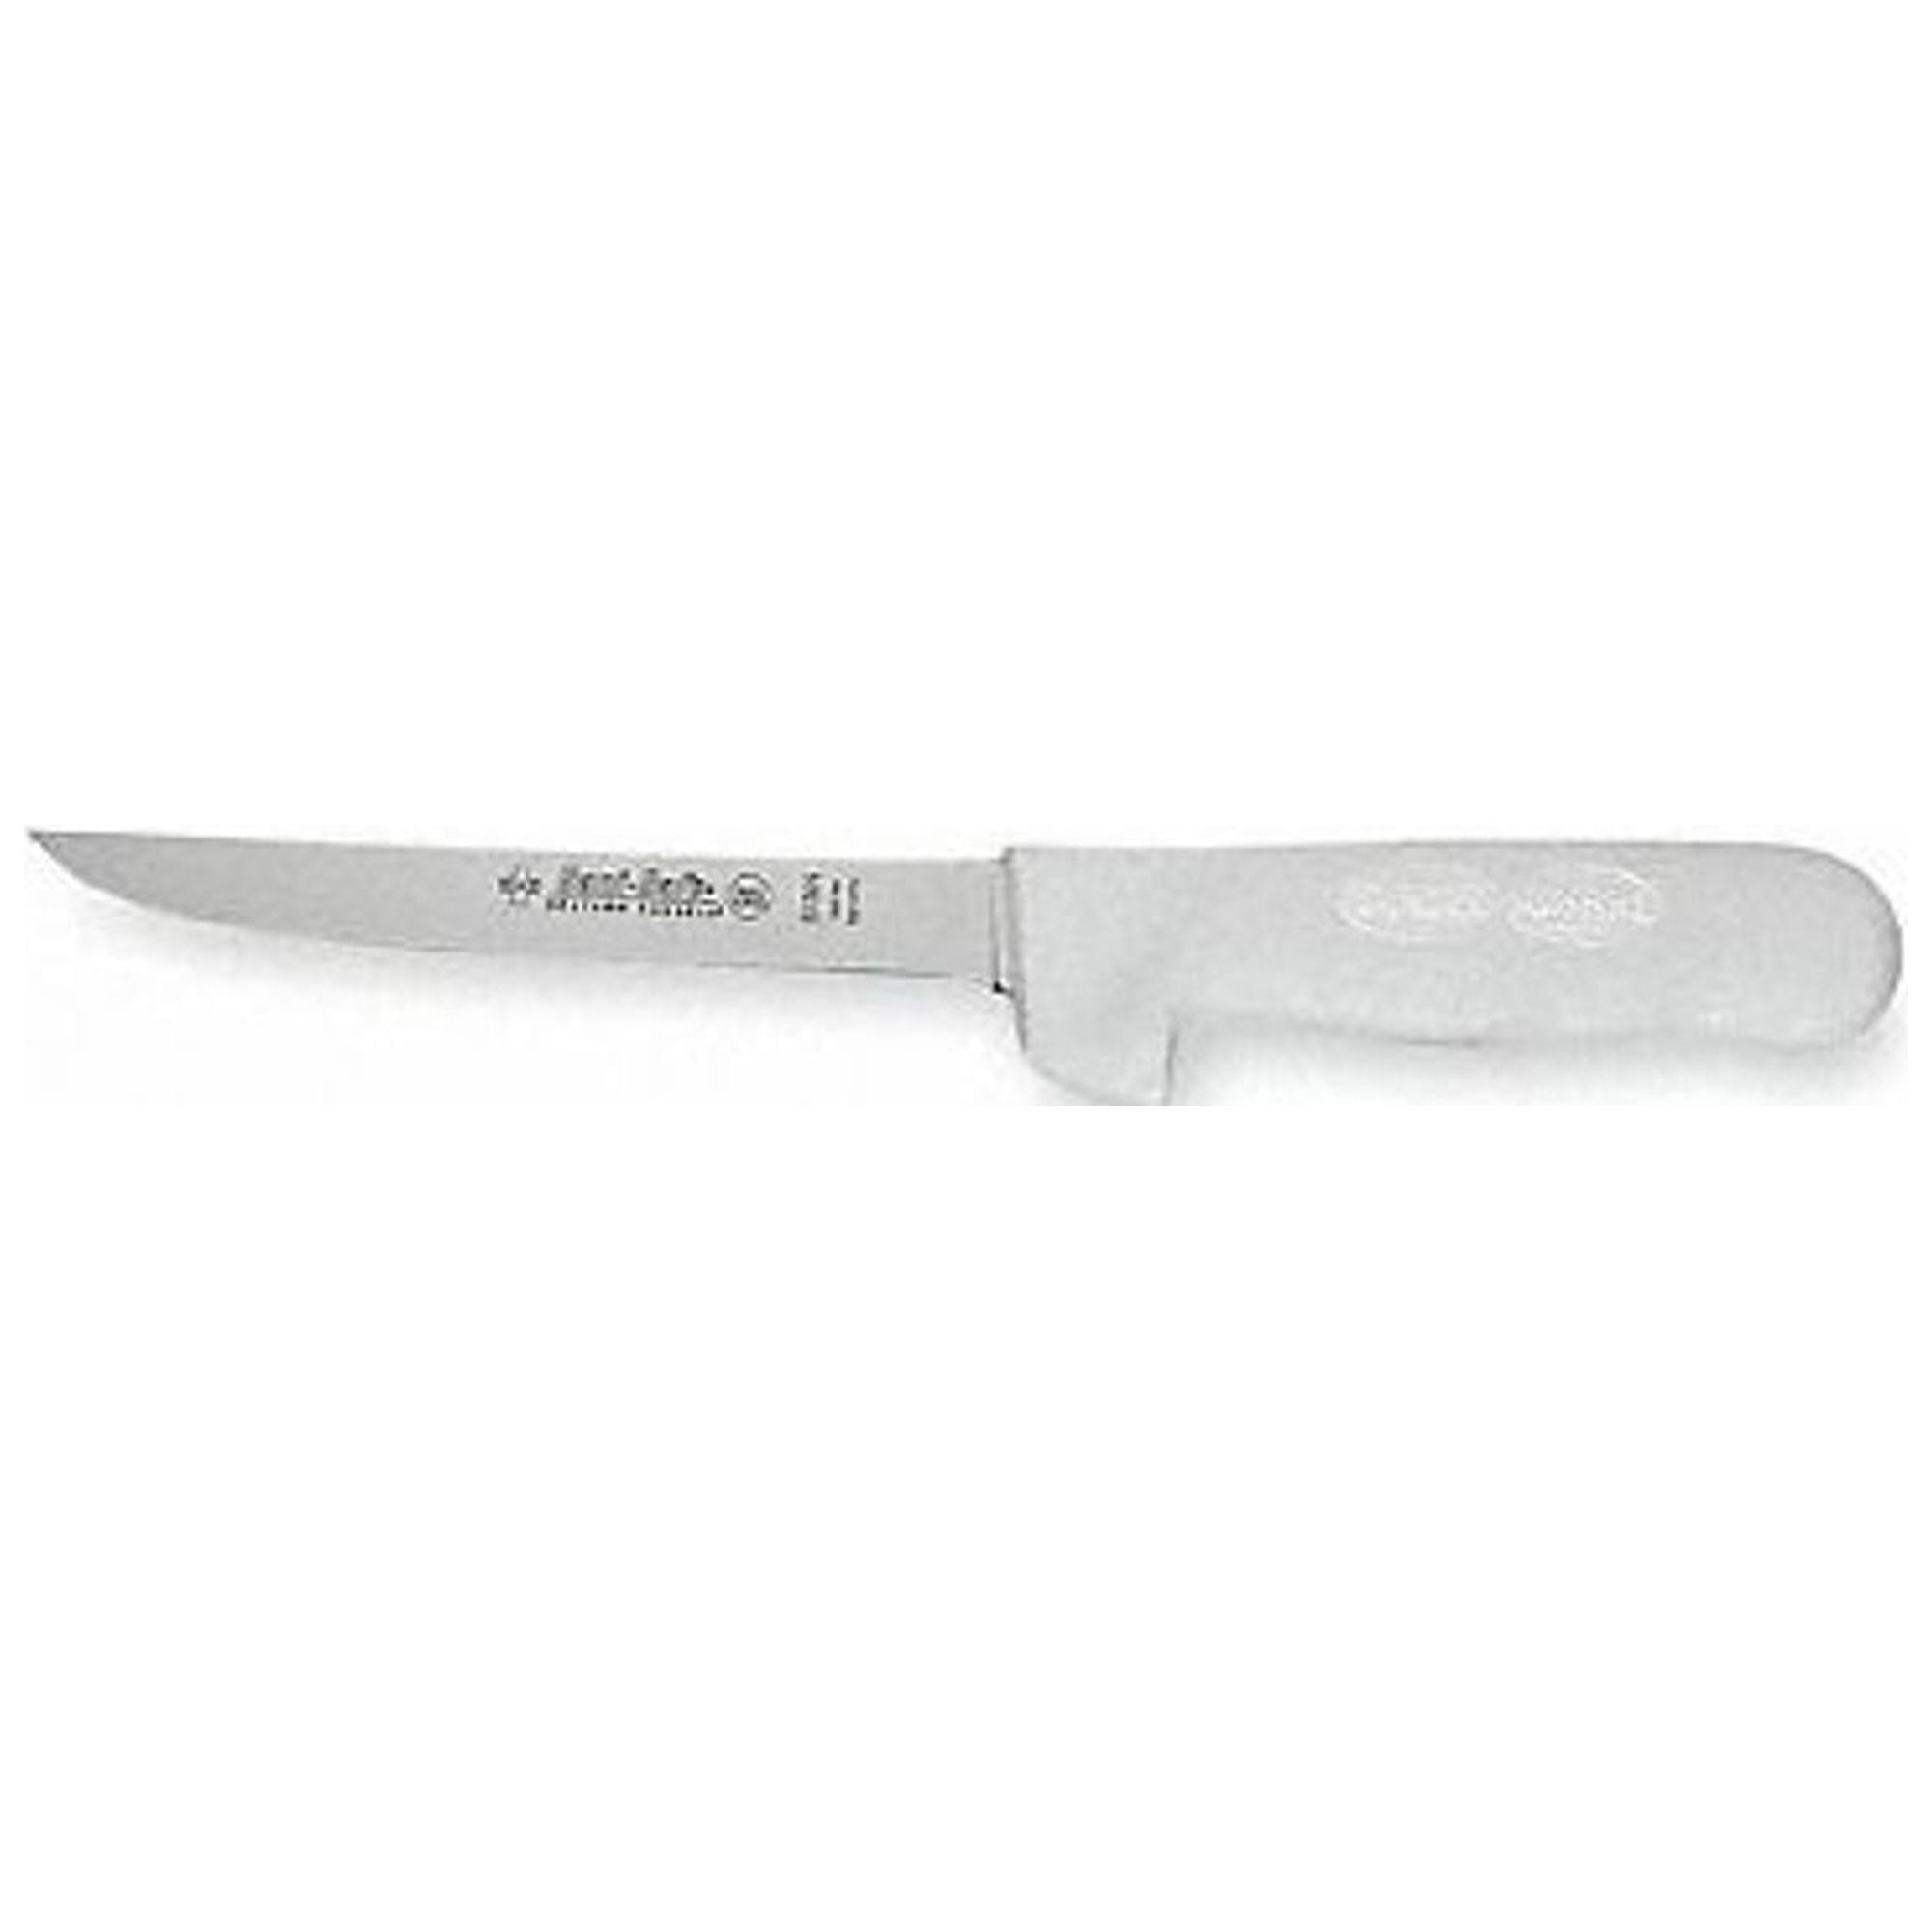 SpitJack BBQ Brisket, Meat Trimming, Fish Fillet and Butcher's Kitchen Boning Knife - 6 inch Curved Stainless Steel Blade